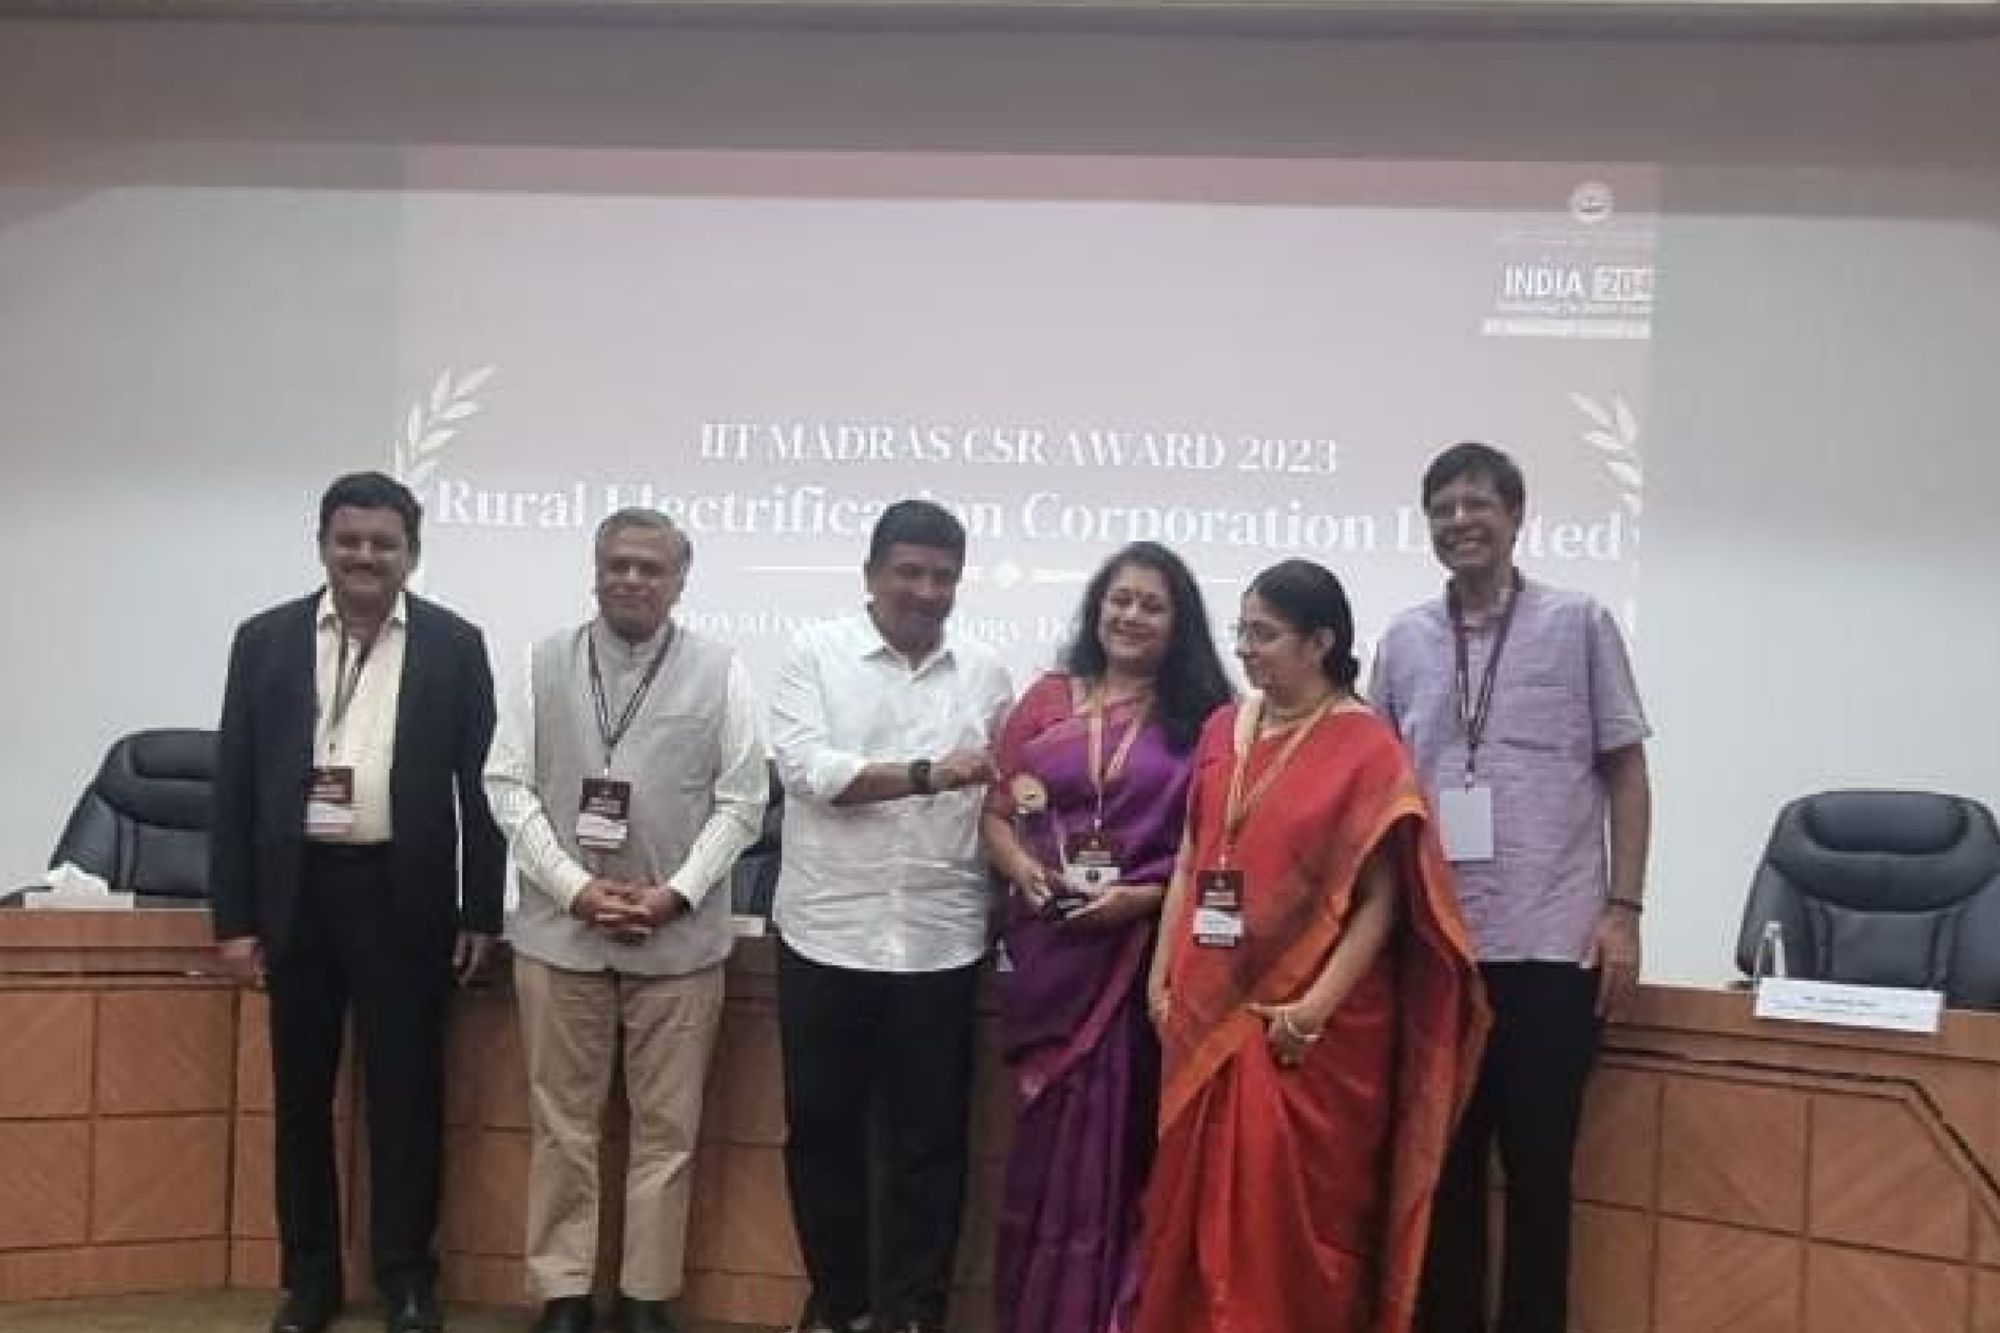 REC limited honoured for innovative CSR initiative at IIT Madras summit